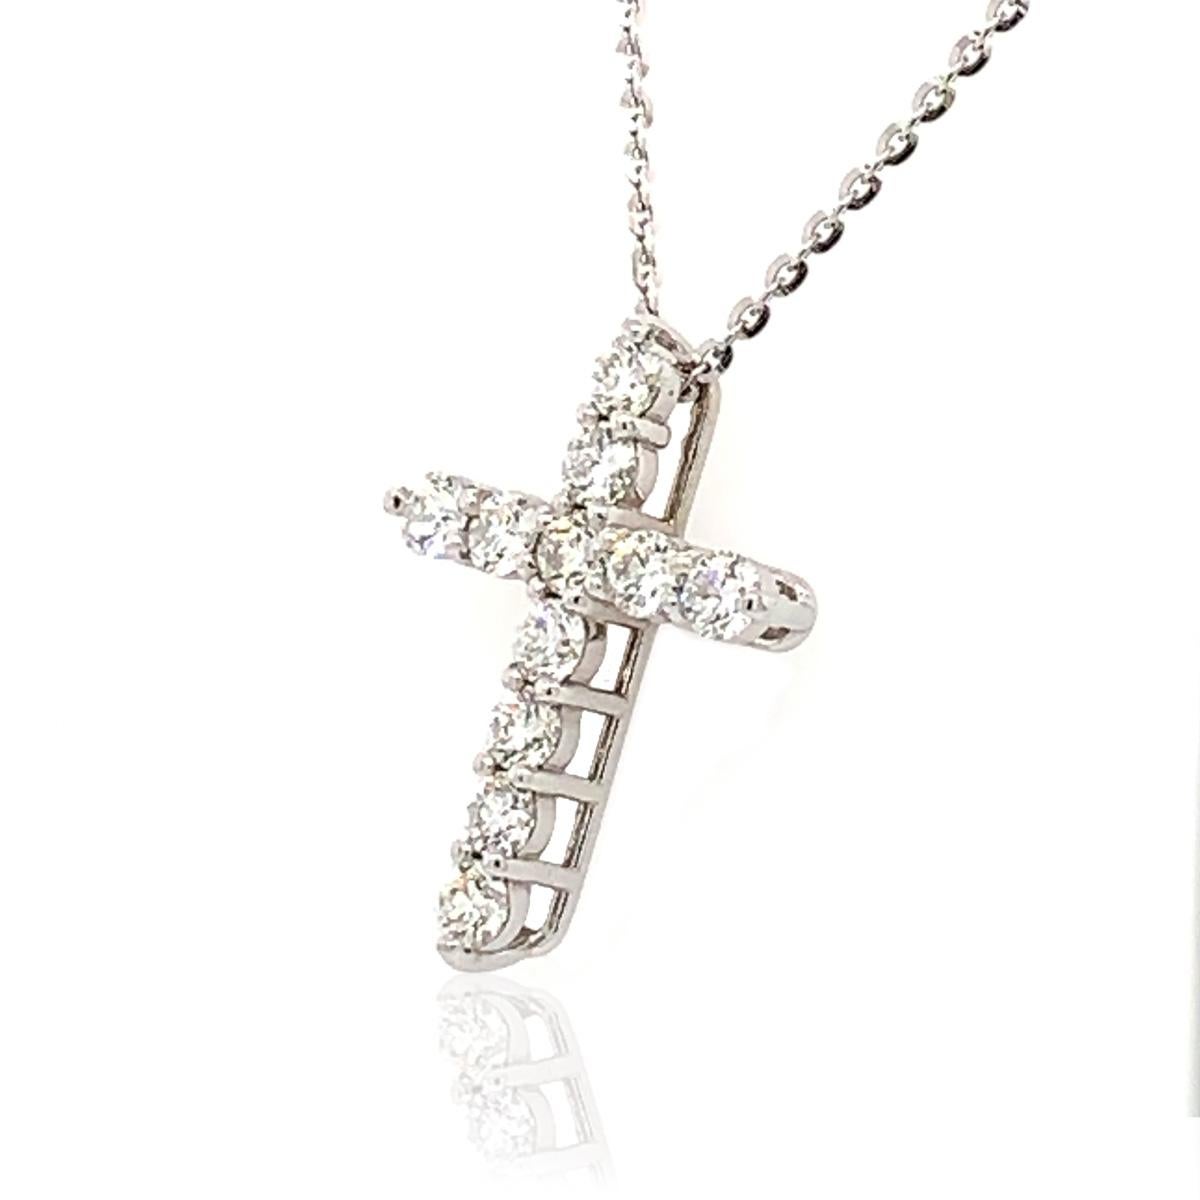 Eleven brilliant shared prongs round diamonds make up this spectacular cross pendant crafted in 14k white gold.

Product details: 

Center Gemstone Type: NATURAL DIAMOND
Center Gemstone Color: WHITE
Center Gemstone Shape: ROUND
Metal: 14K White